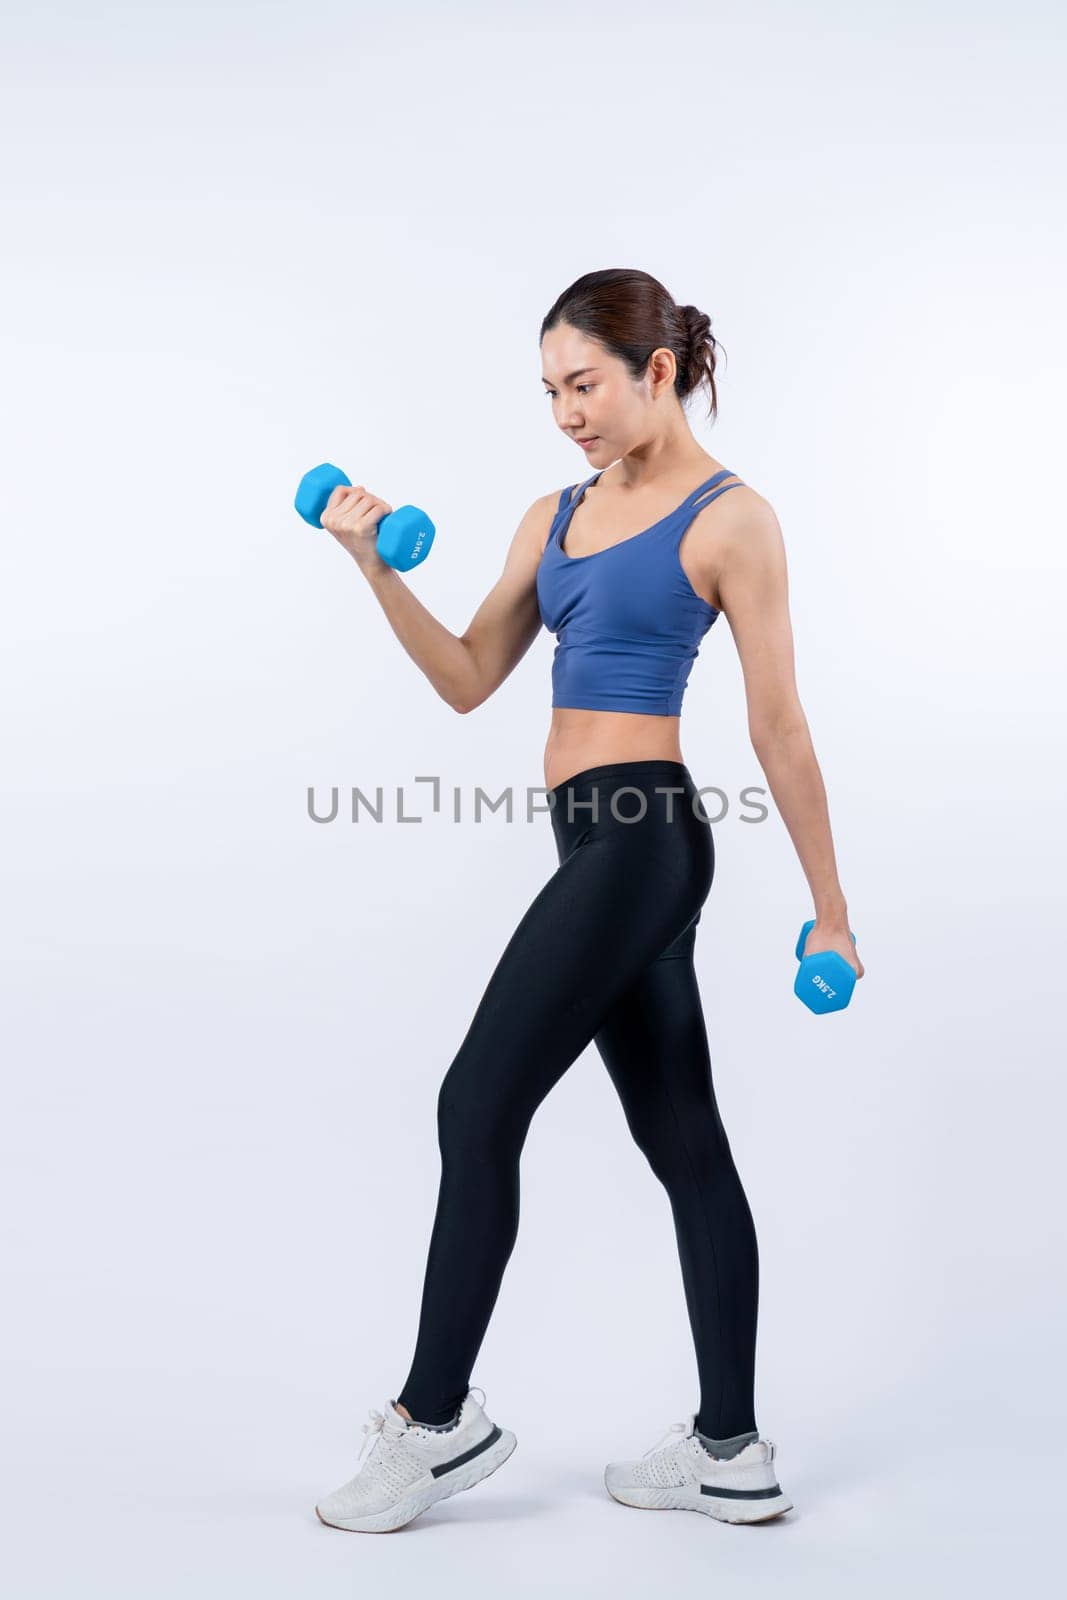 Vigorous energetic woman doing dumbbell weight lifting exercise on isolated background. Young athletic asian woman strength and endurance training session as body workout routine.